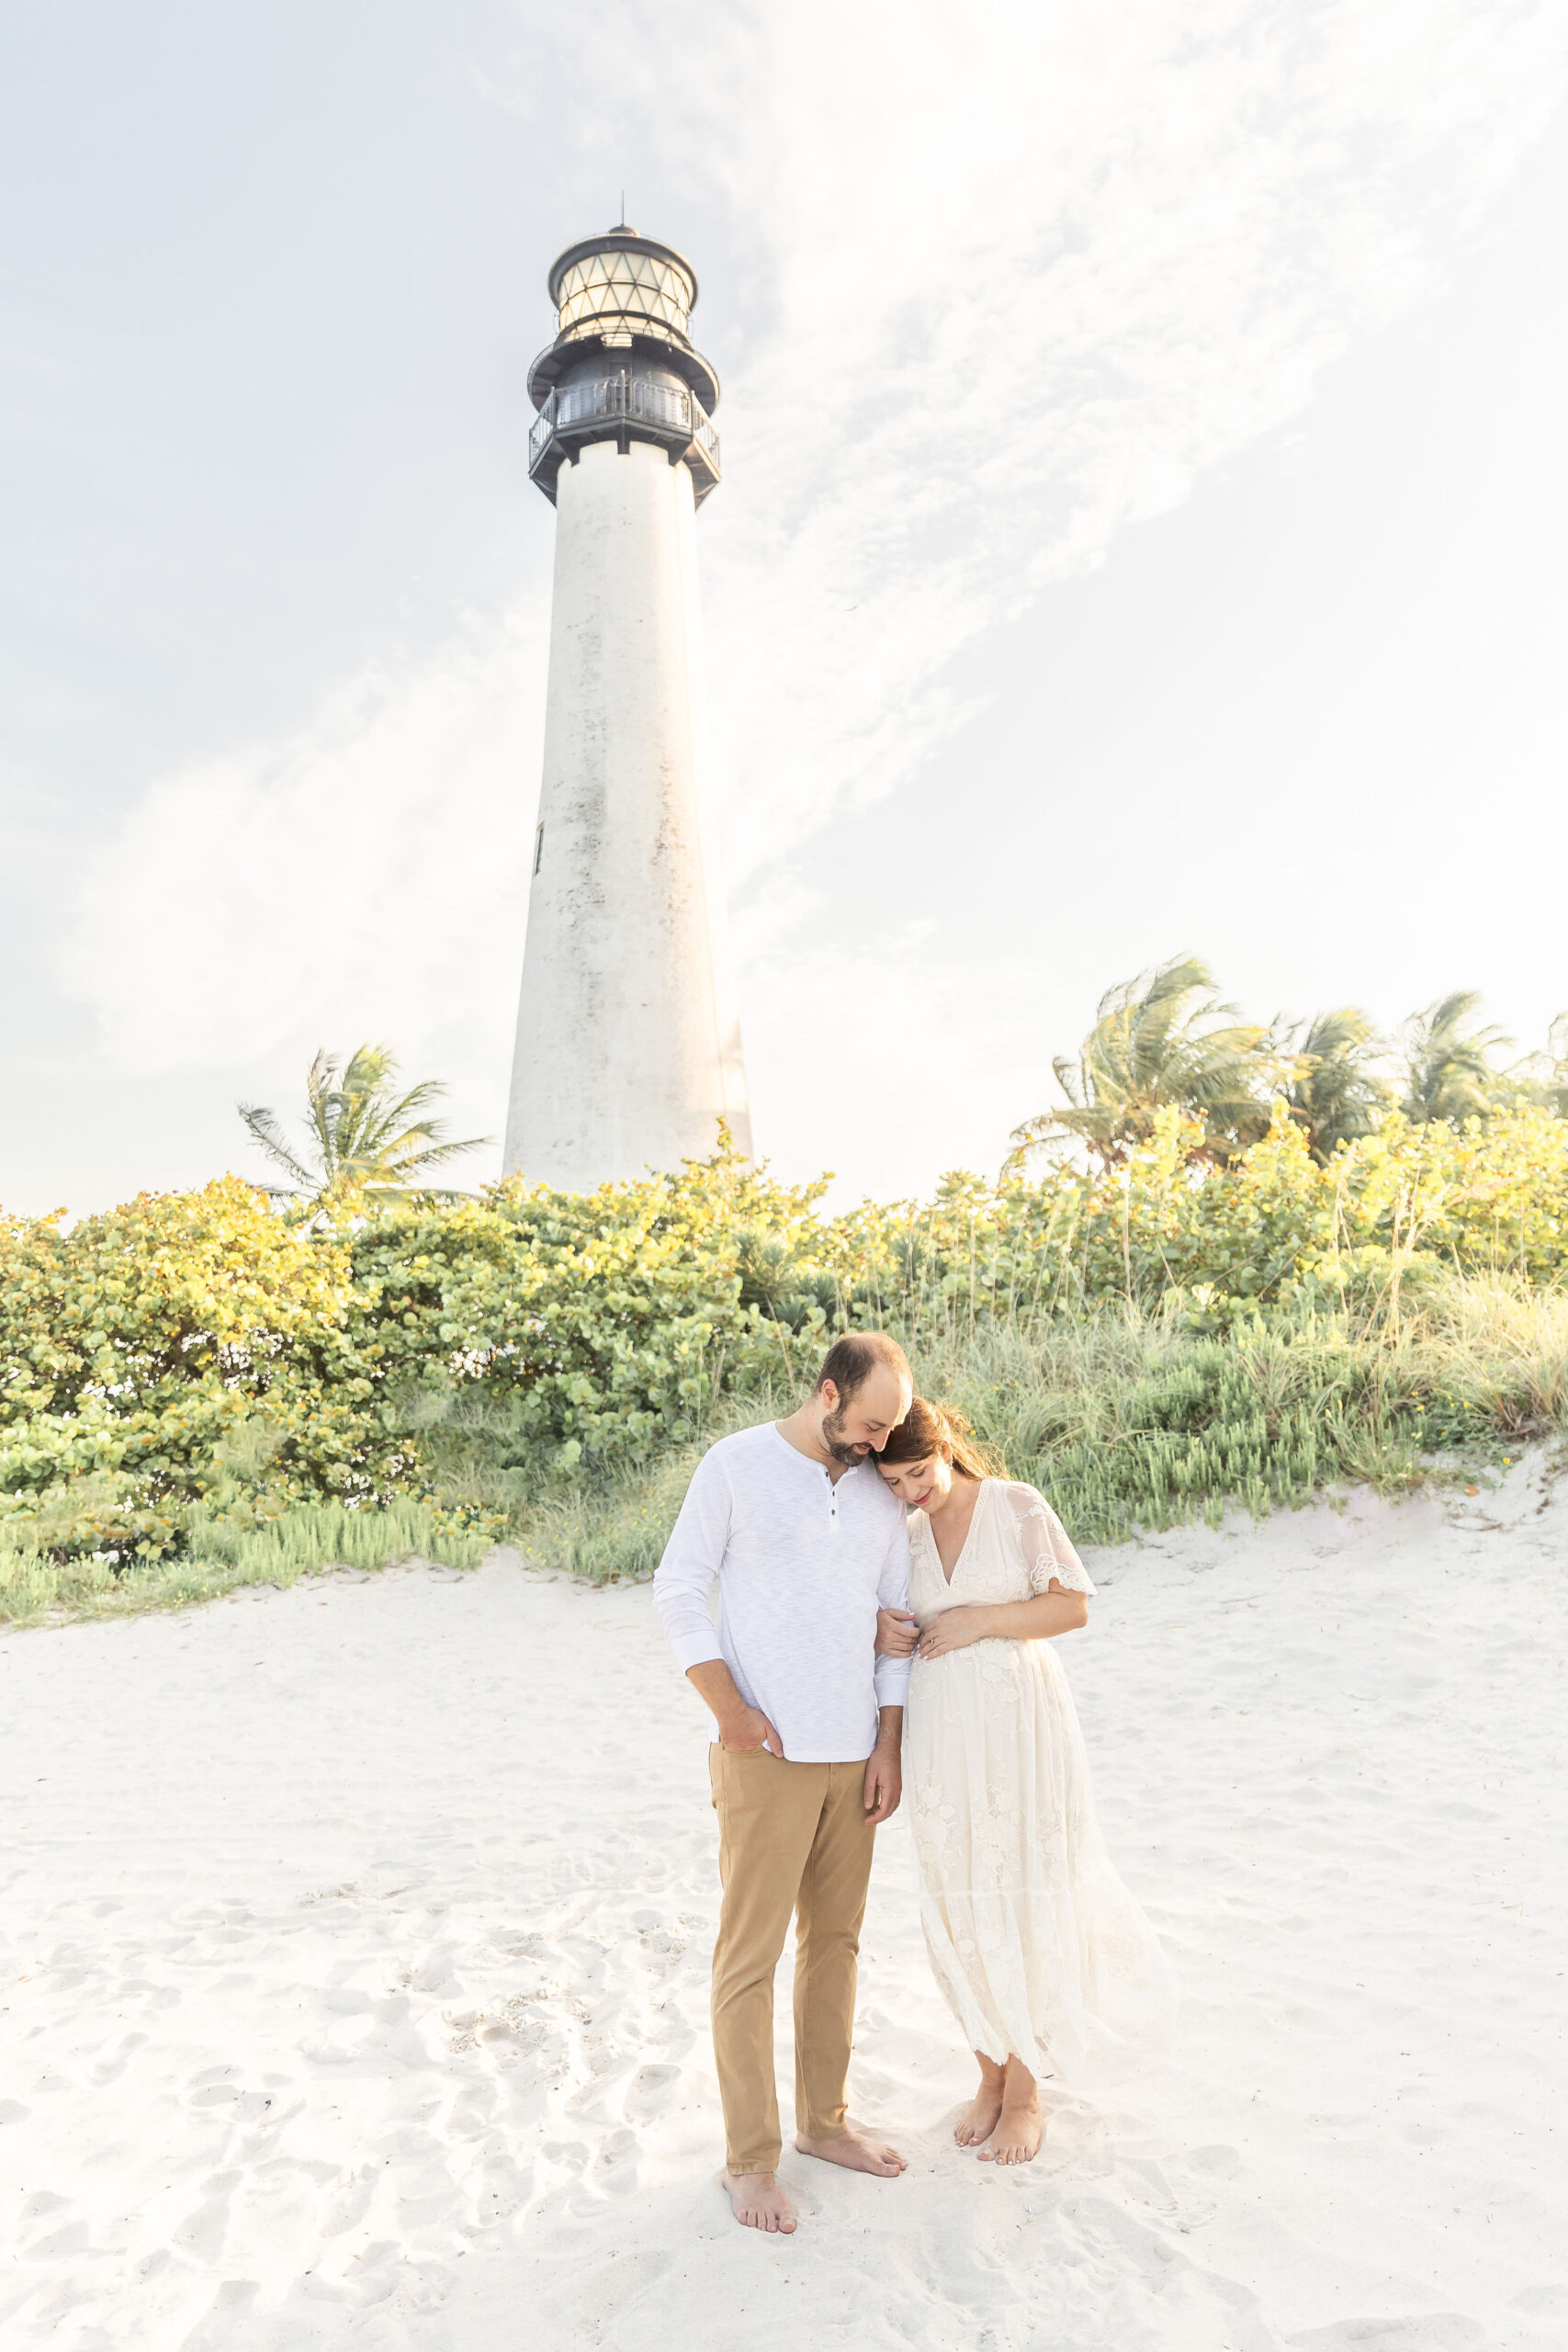 A mom to be in a beige dress leans on her husbands arm as they stand on a beach by a lighthouse after visiting a miami birthing center